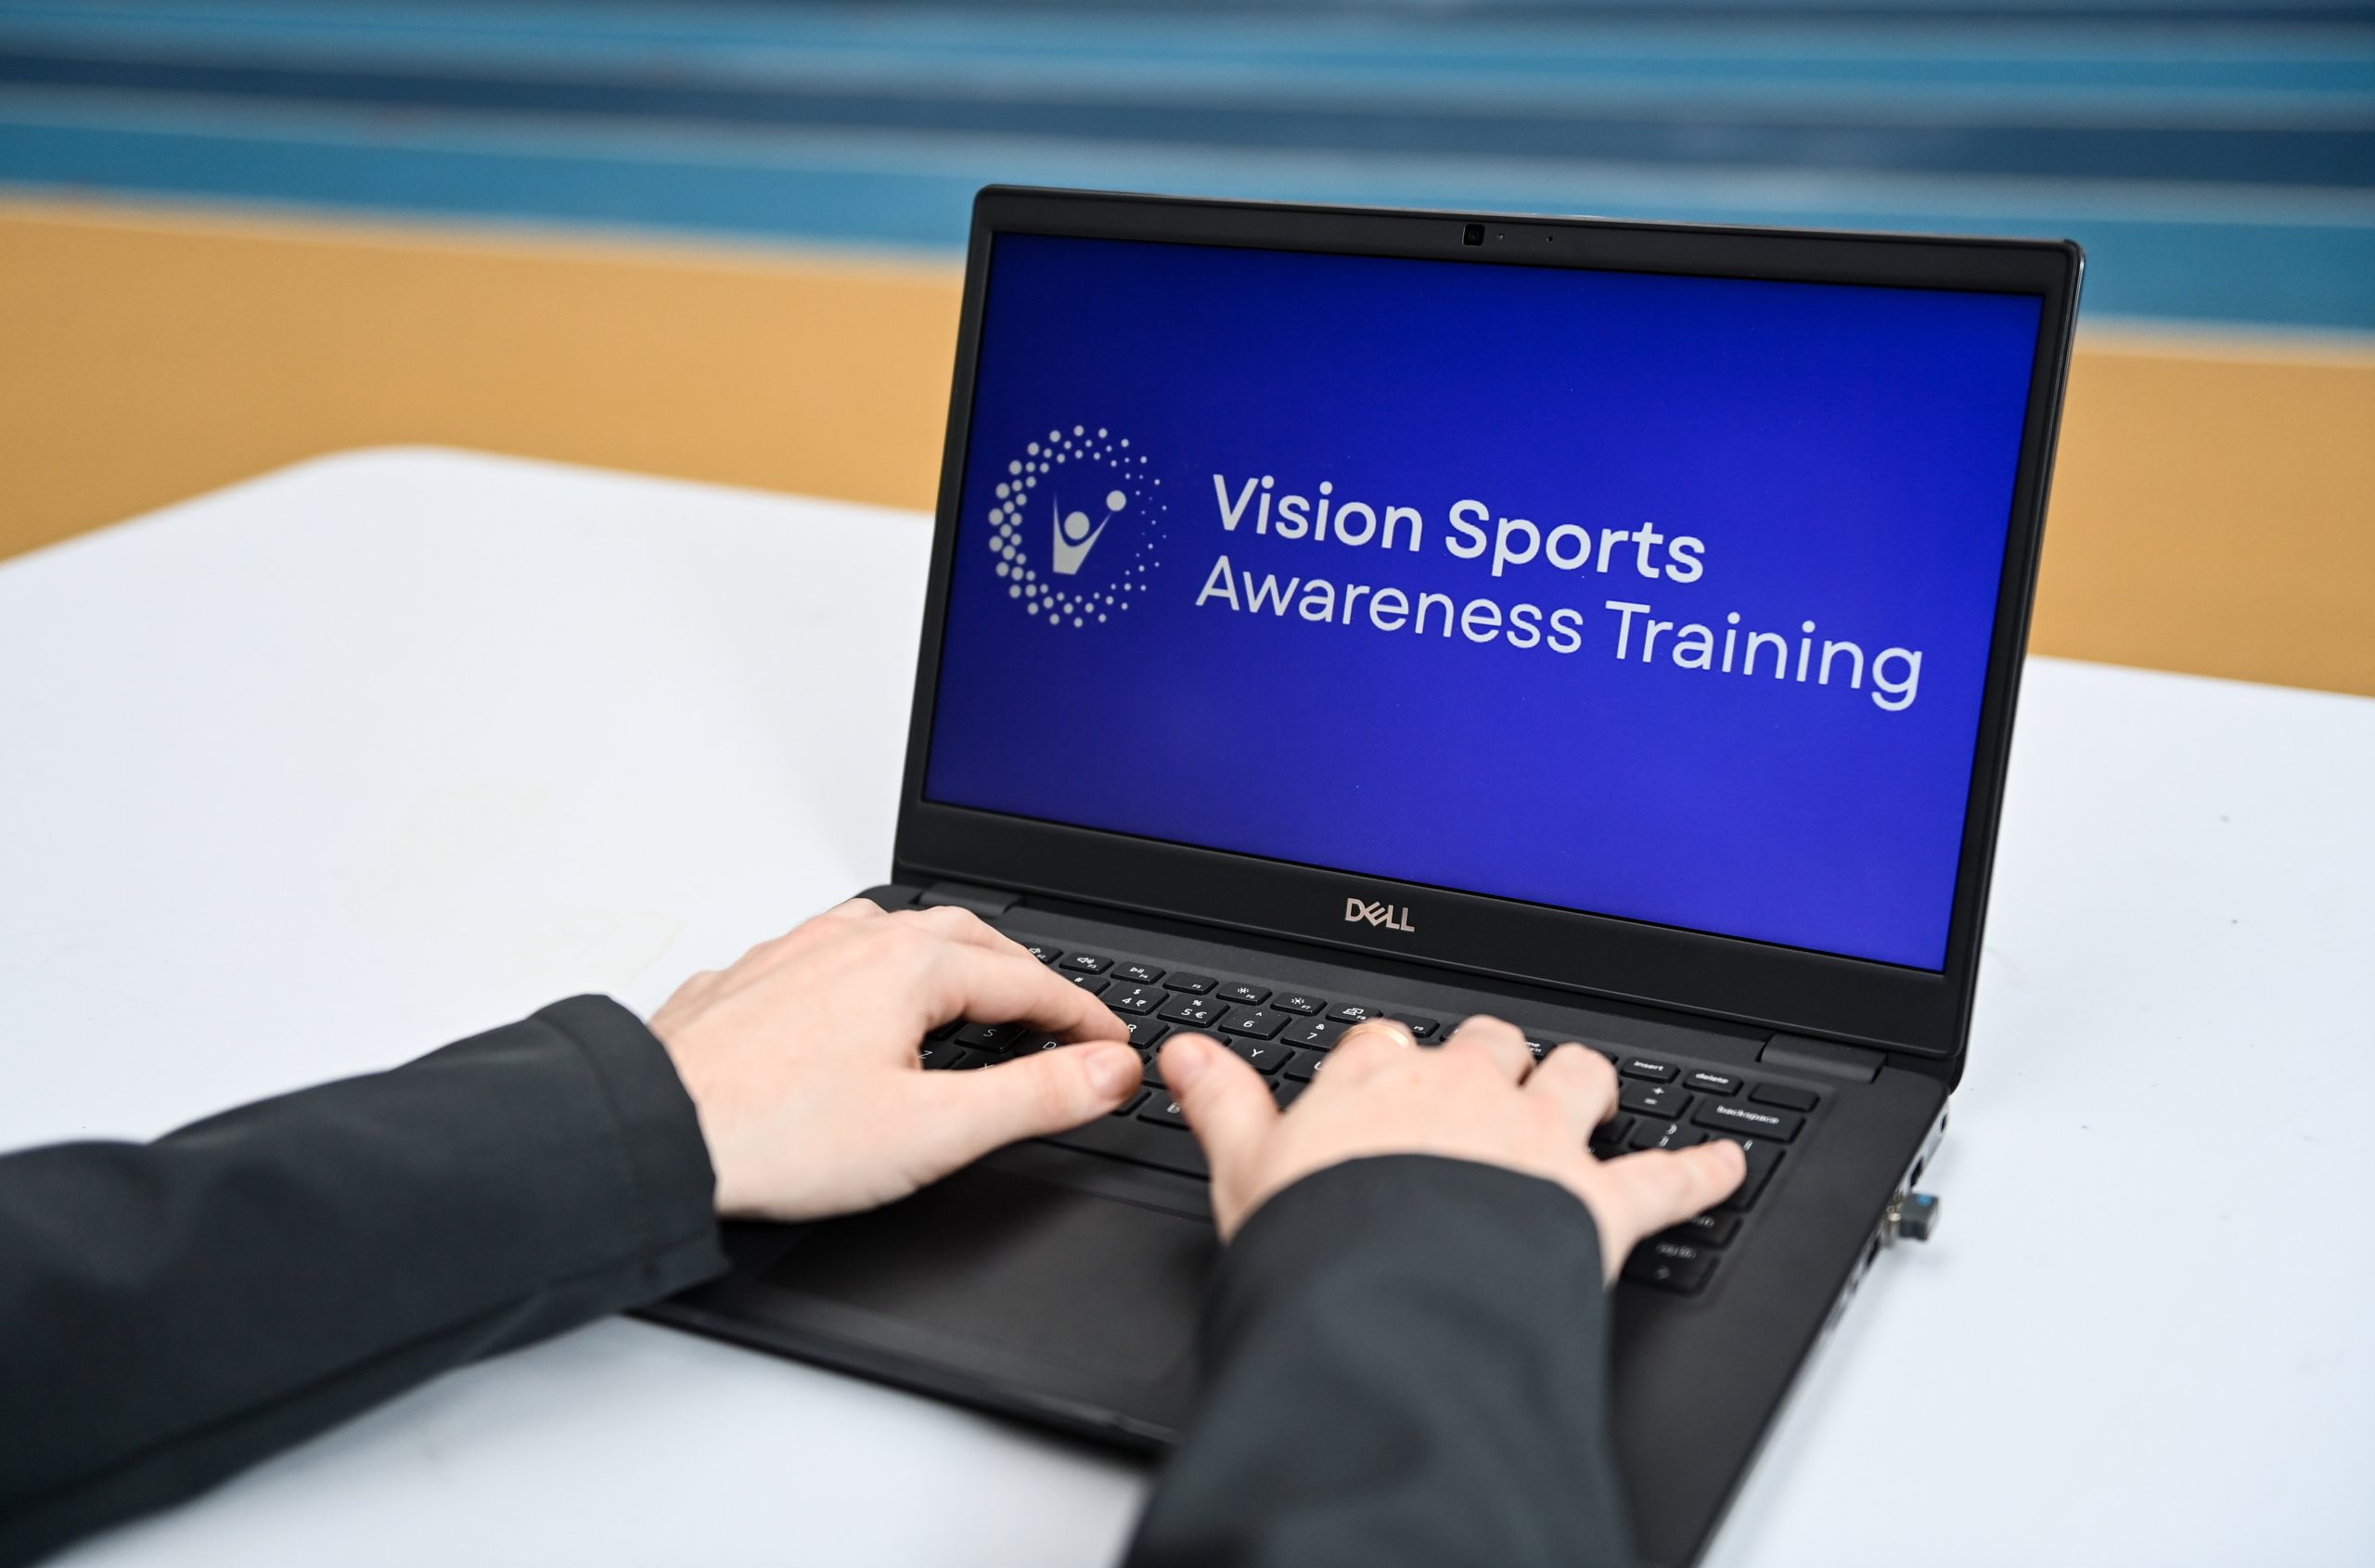 person typing on a laptop vision sports awareness training logo displayed on the screen